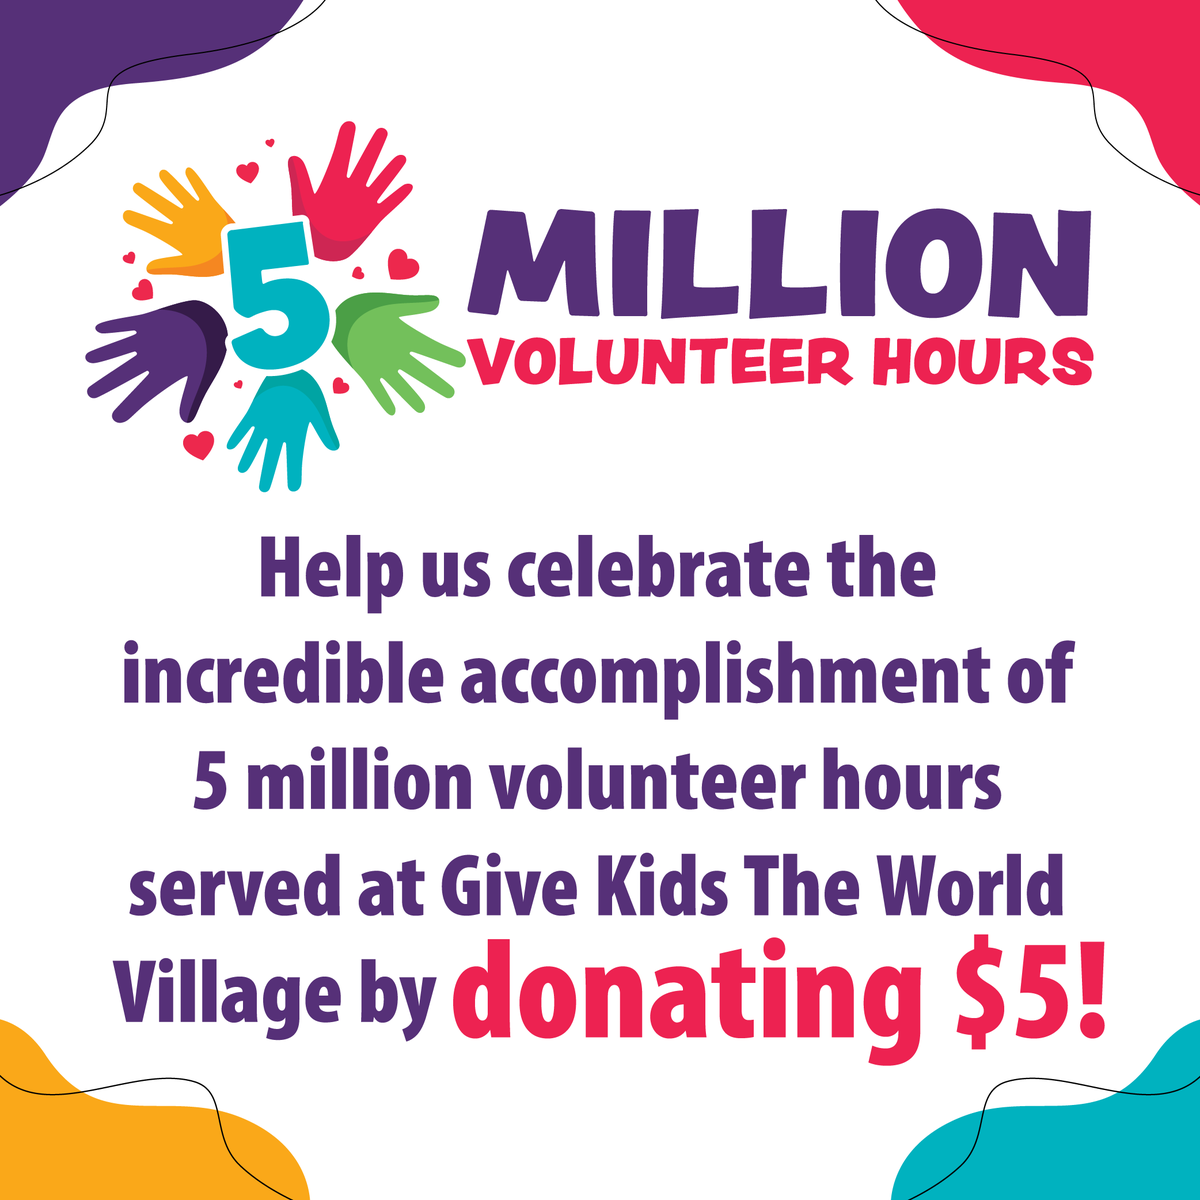 Join us in celebrating the accomplishment of 5 million volunteer hours served at Give Kids The World Village by participating in our High Five fundraising campaign! Please give today at gktw.org/high5, or go to gktw.org/high5team and start a fundraising page! 💜